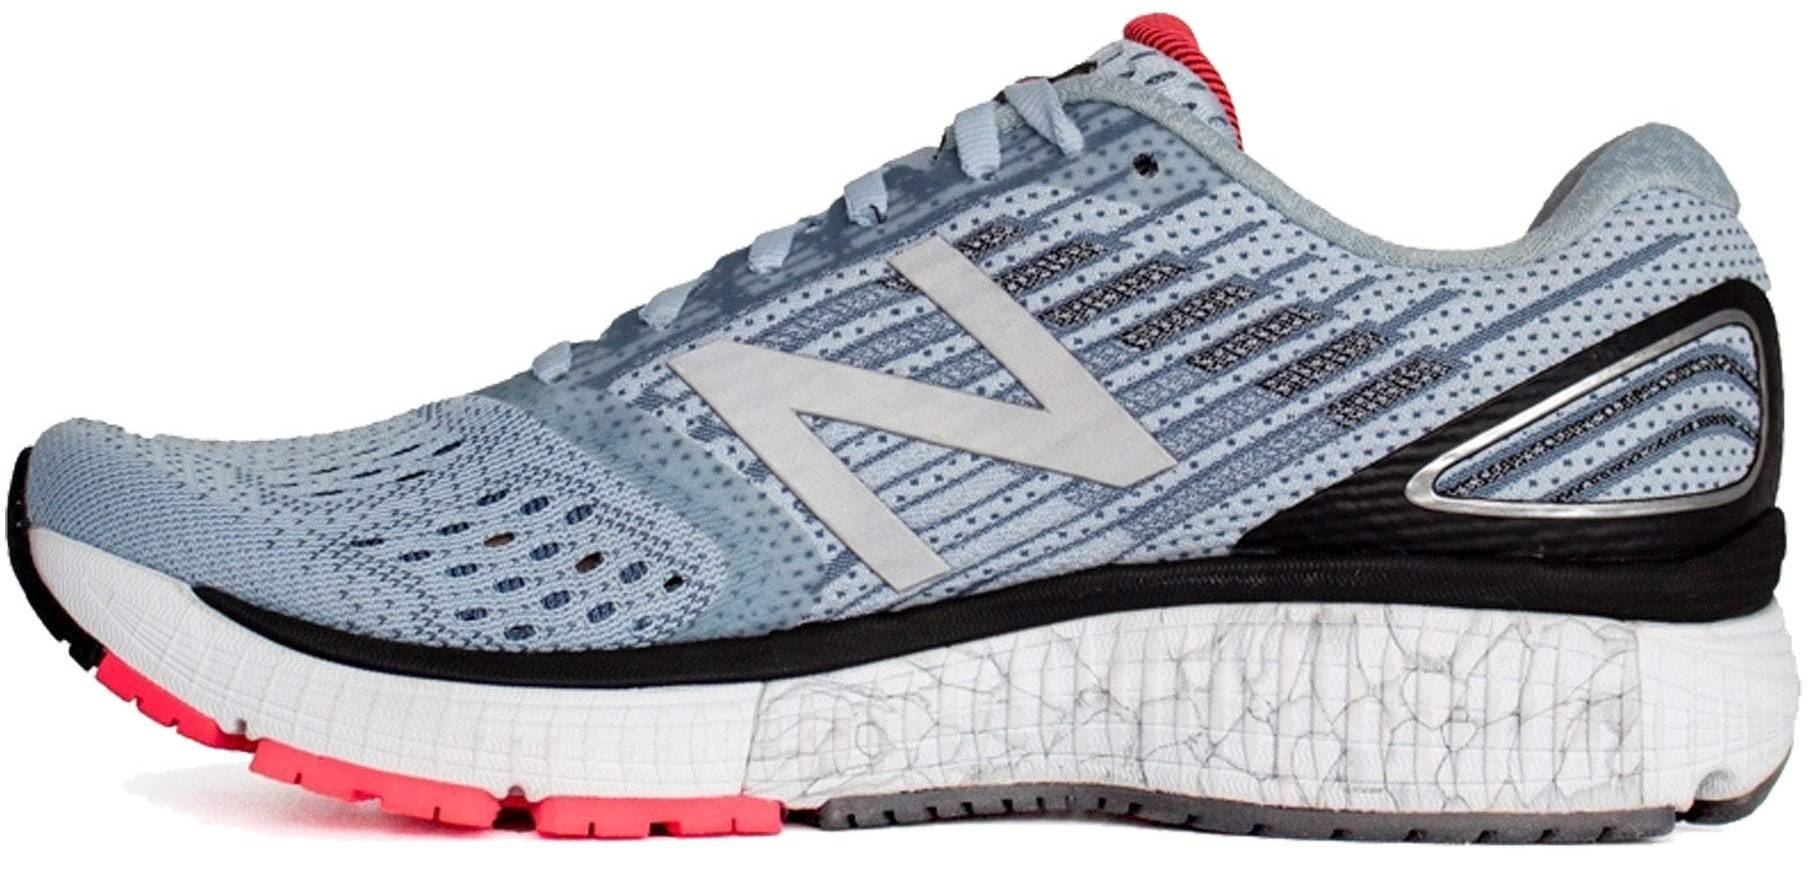 candidate another throw away New Balance Overpronation Trainers Dubai, SAVE 35% - thlaw.co.nz